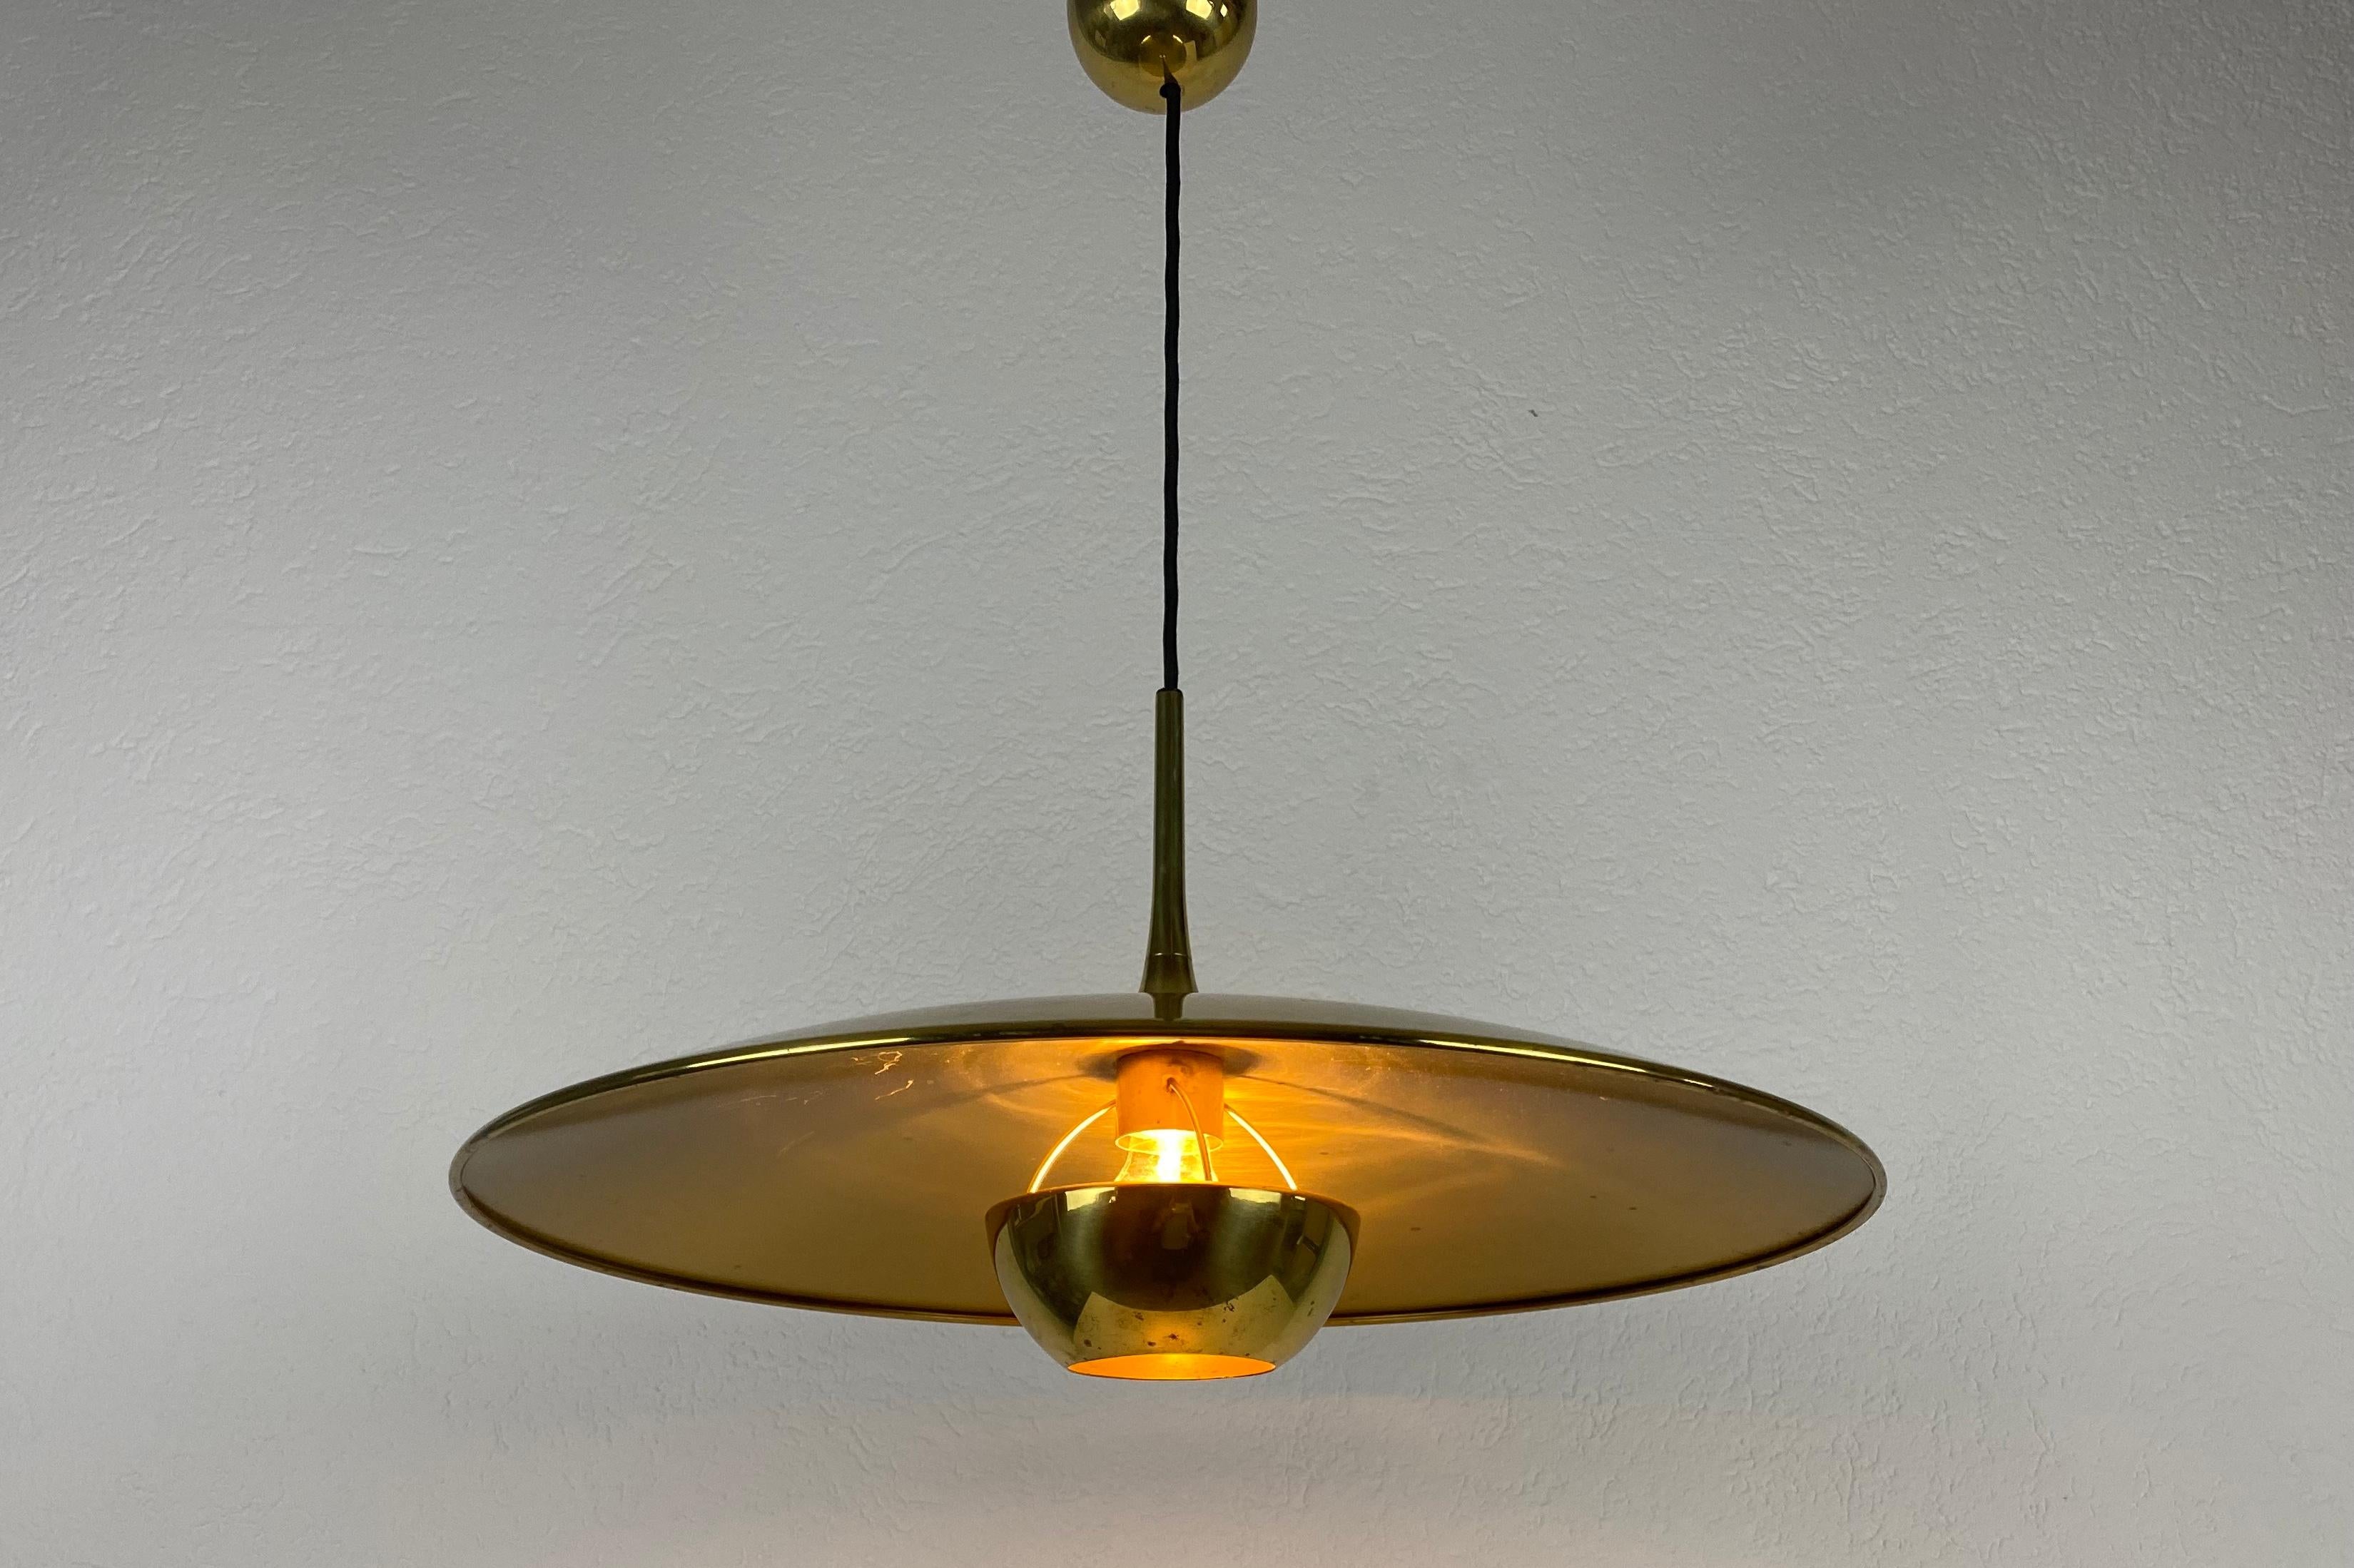 Late 20th Century 'Onos 55' Brass Pendant Lamp with Counterweight by Florian Schulz, 1970s Germany